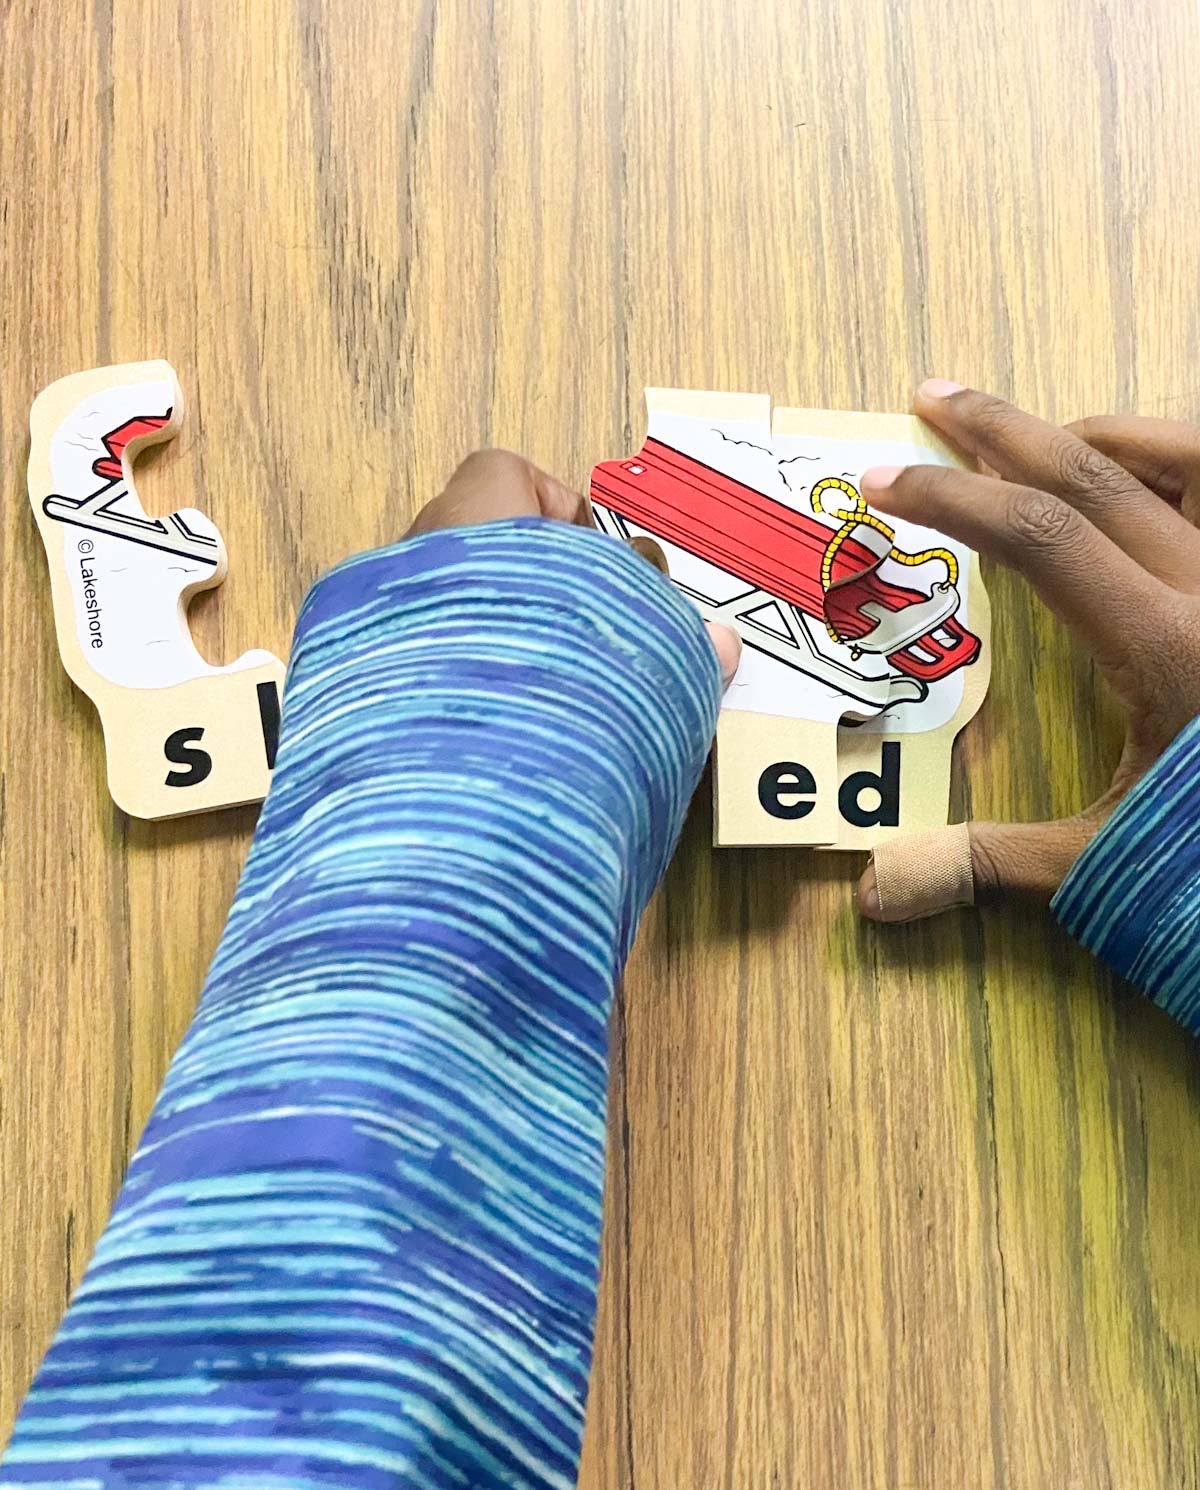 A child's hands putting together a small puzzle to create the word, "sled."